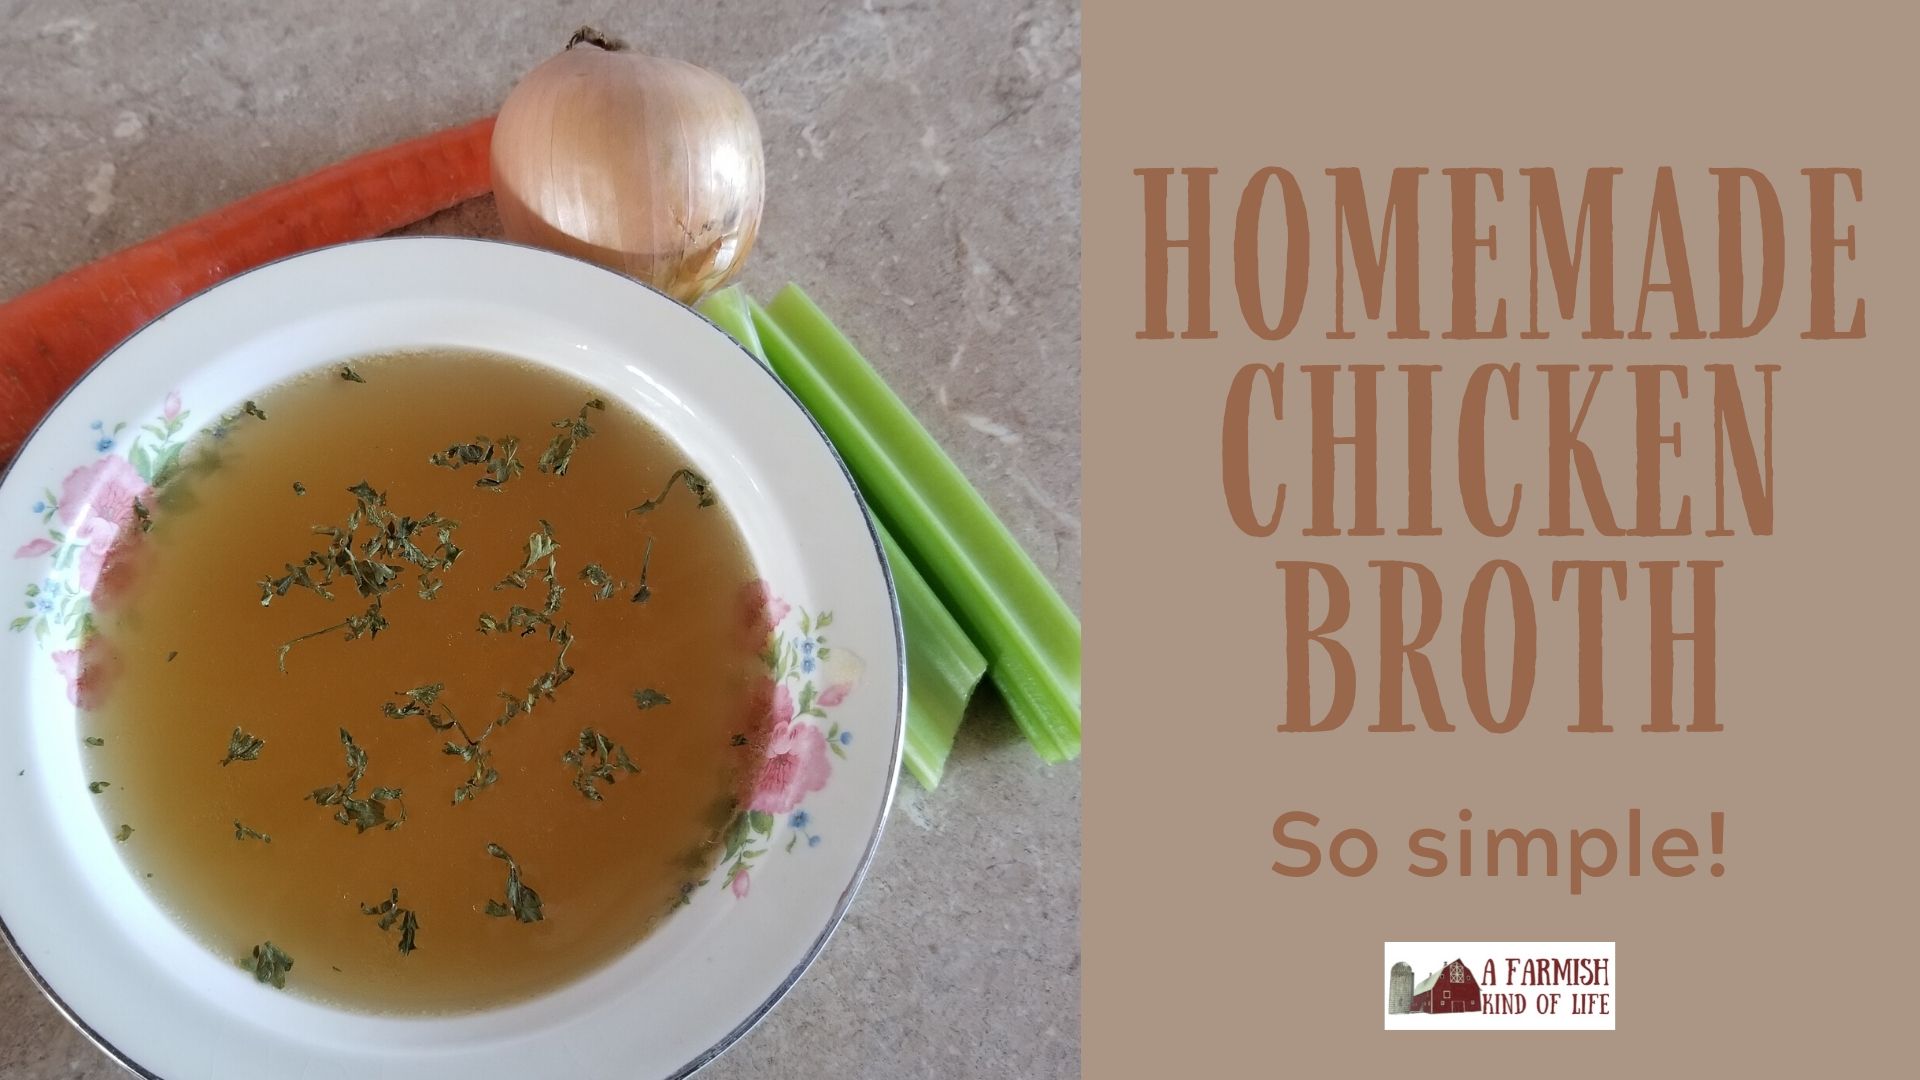 73: Homemade Chicken Broth — it’s easier than you think!